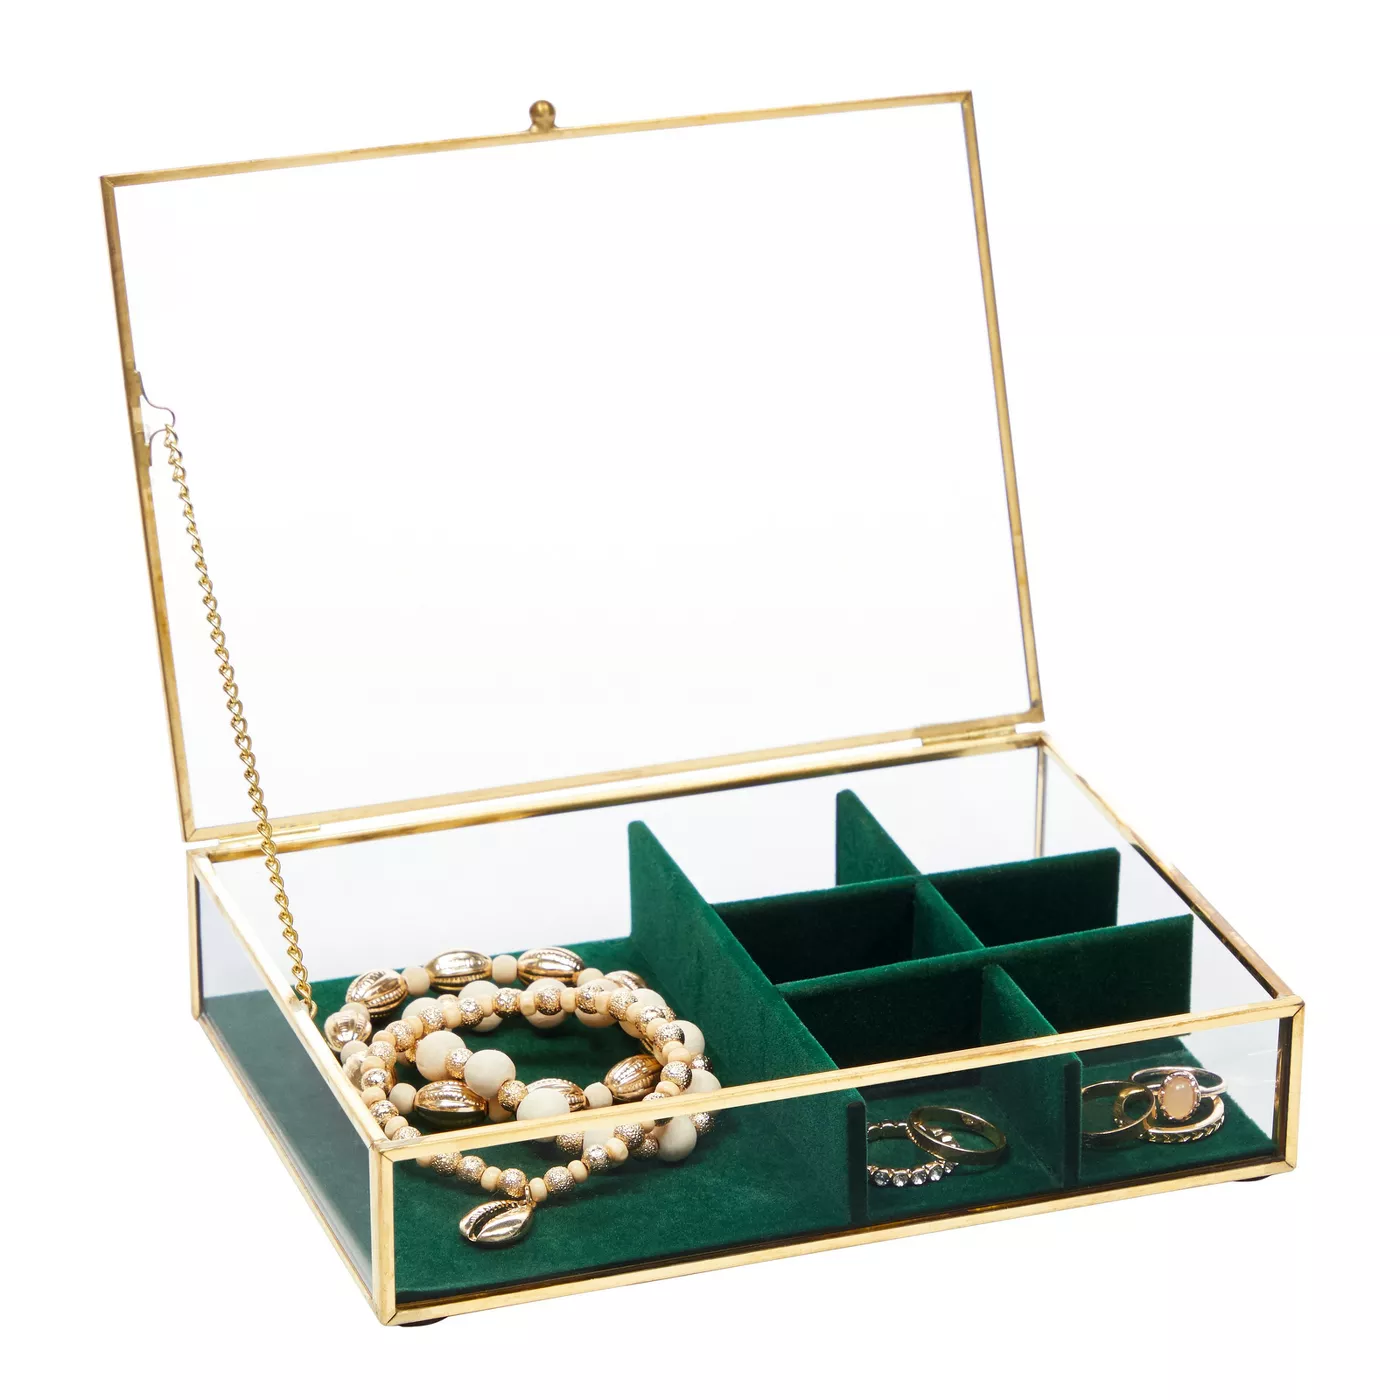 Juvale Clear Glass Jewelry Box with Lid and Green Velvet Compartments, Gold Display Case.